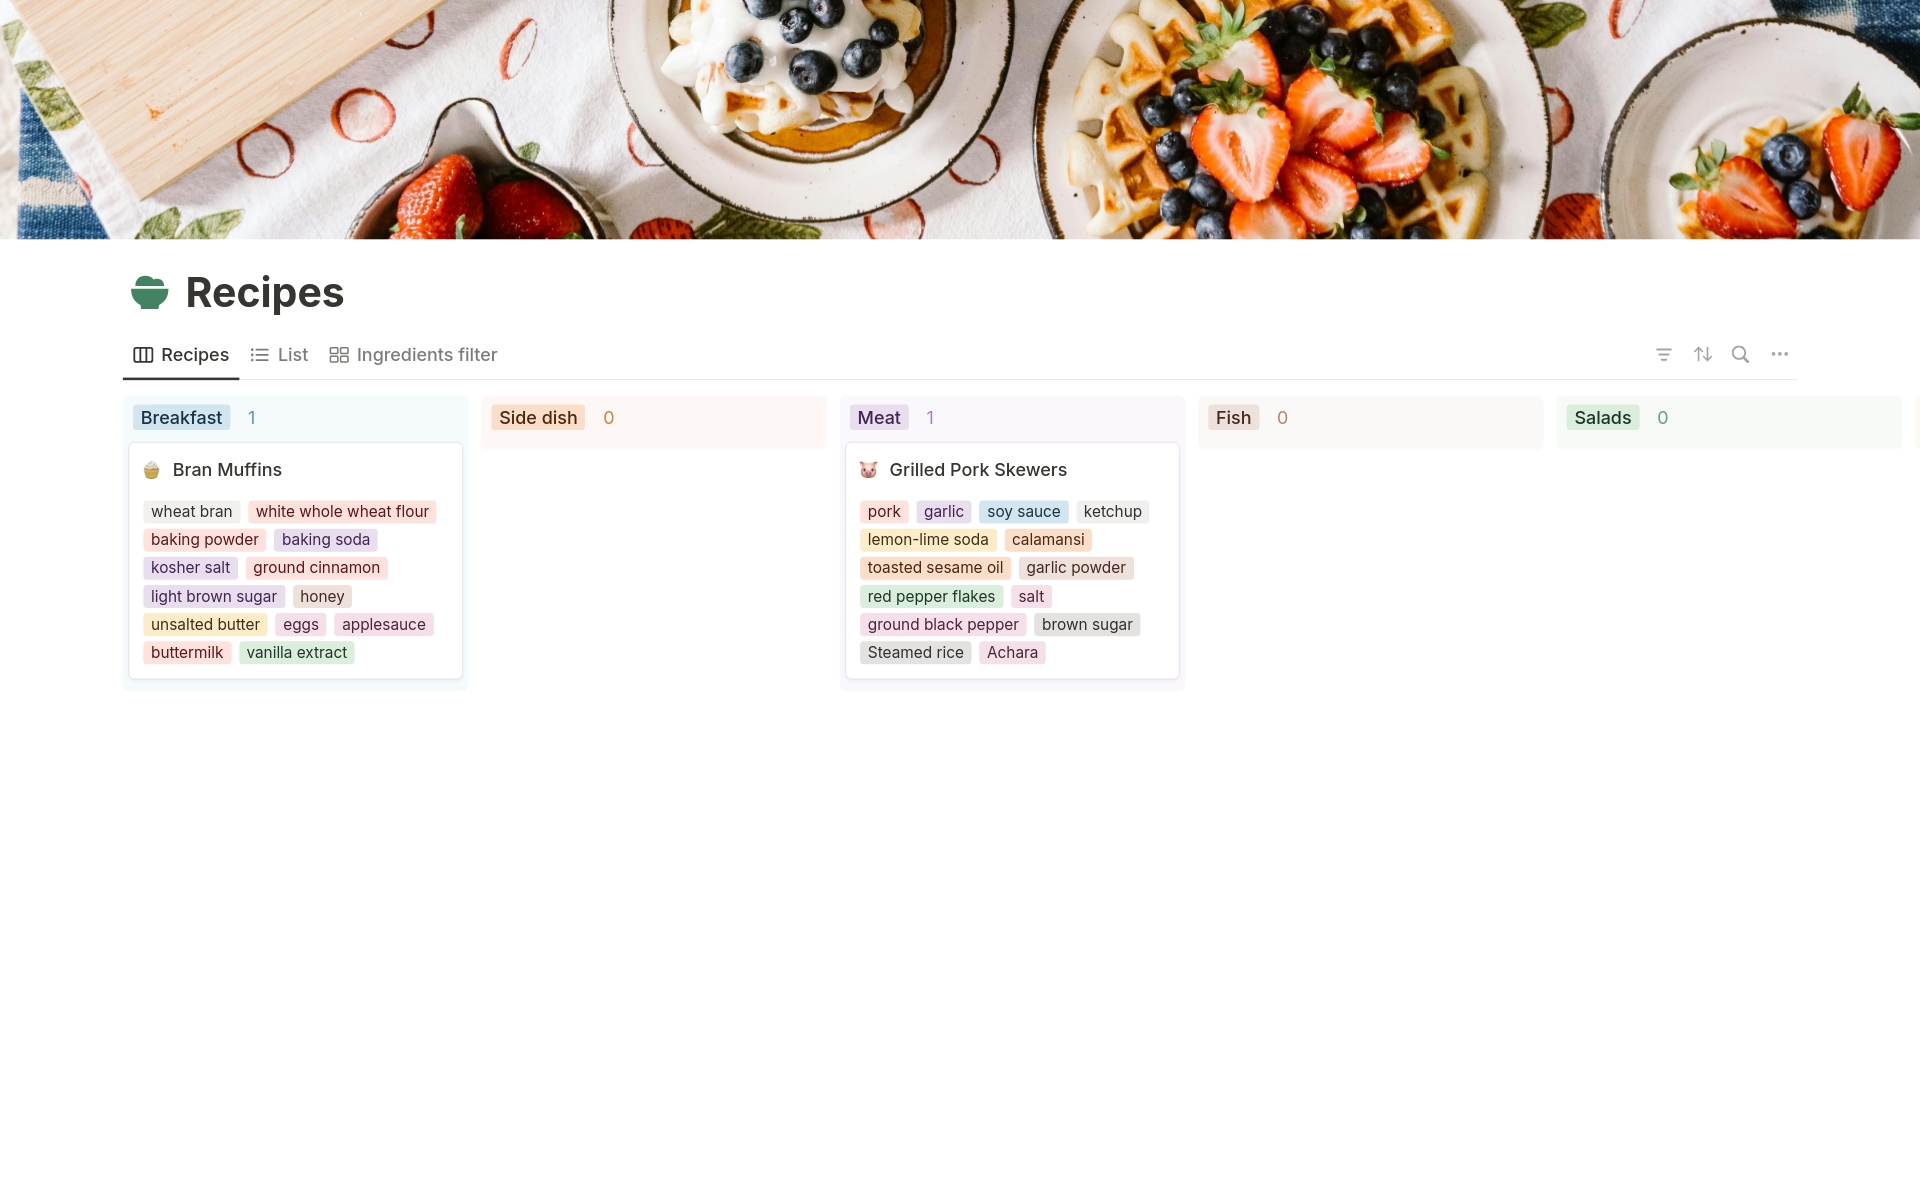 Simple recipe template. There is a filter by ingredients. Recipes are divided into categories